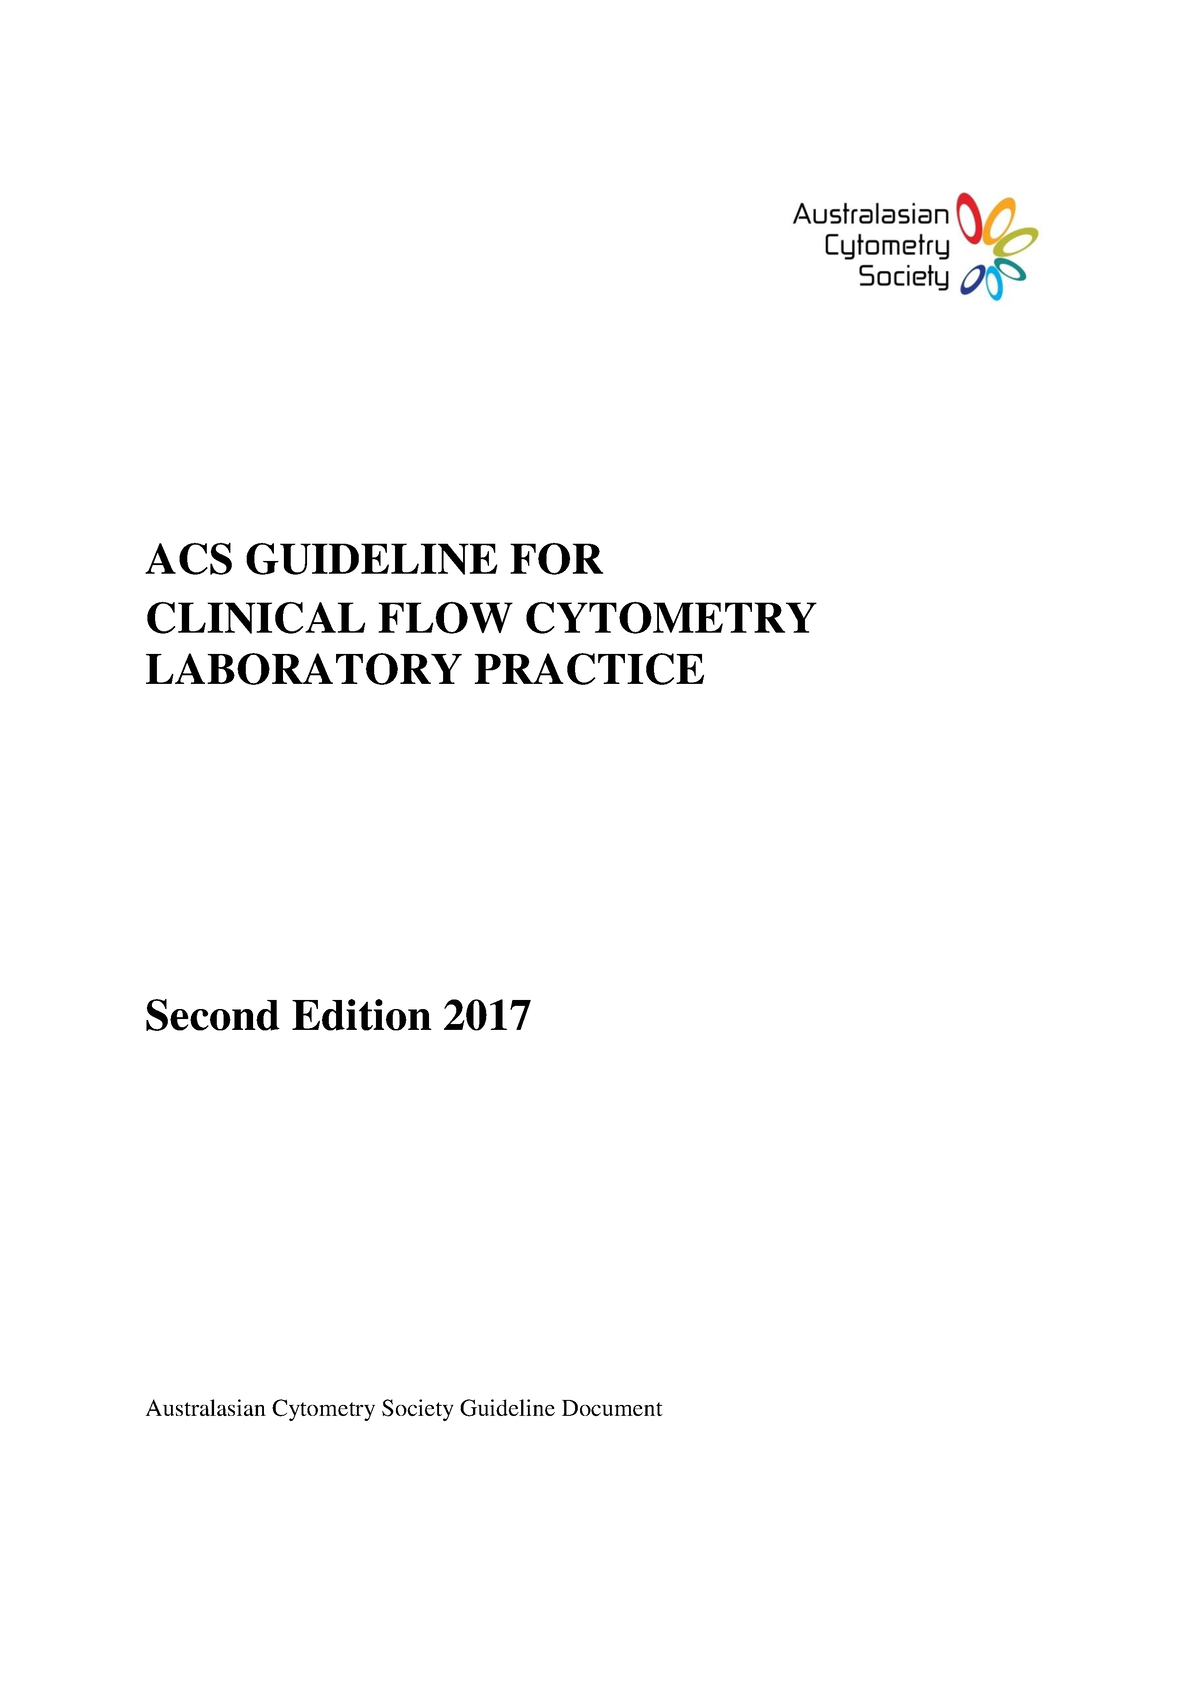 Acs guideline for clinical flow cytometry laboratory practice ACS